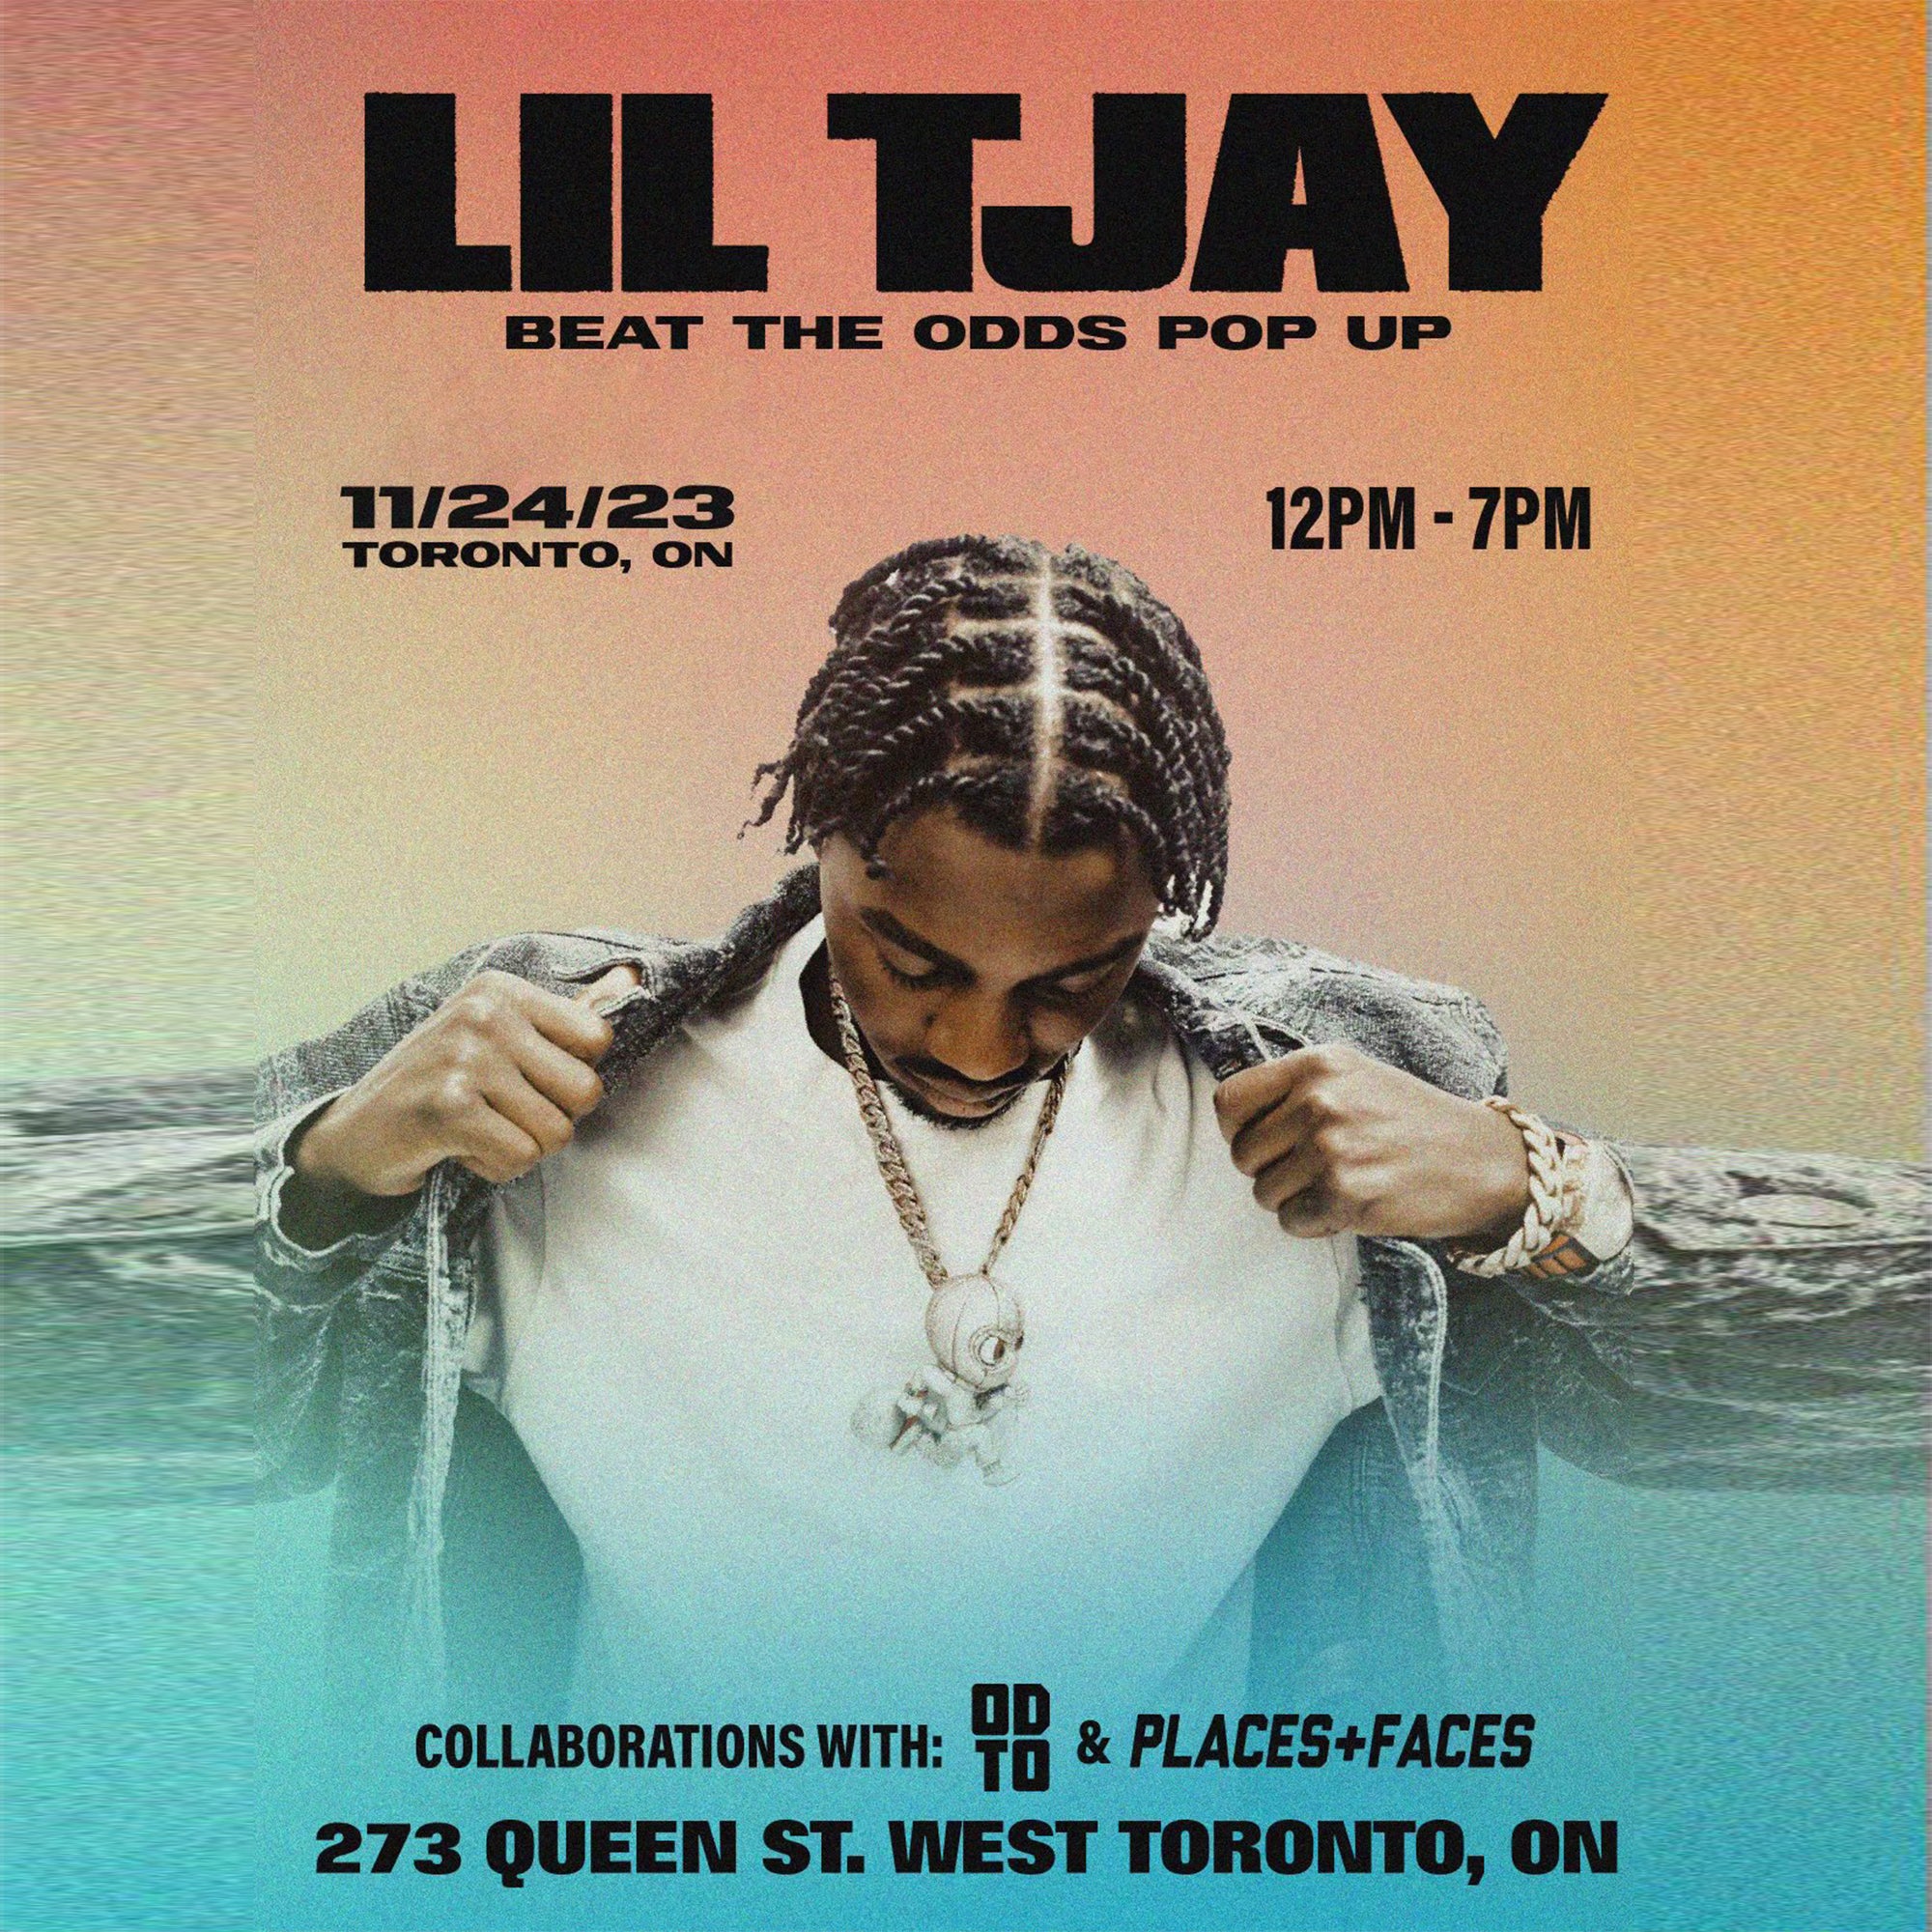 LIL TJAY BEAT THE ODDS POP-UP